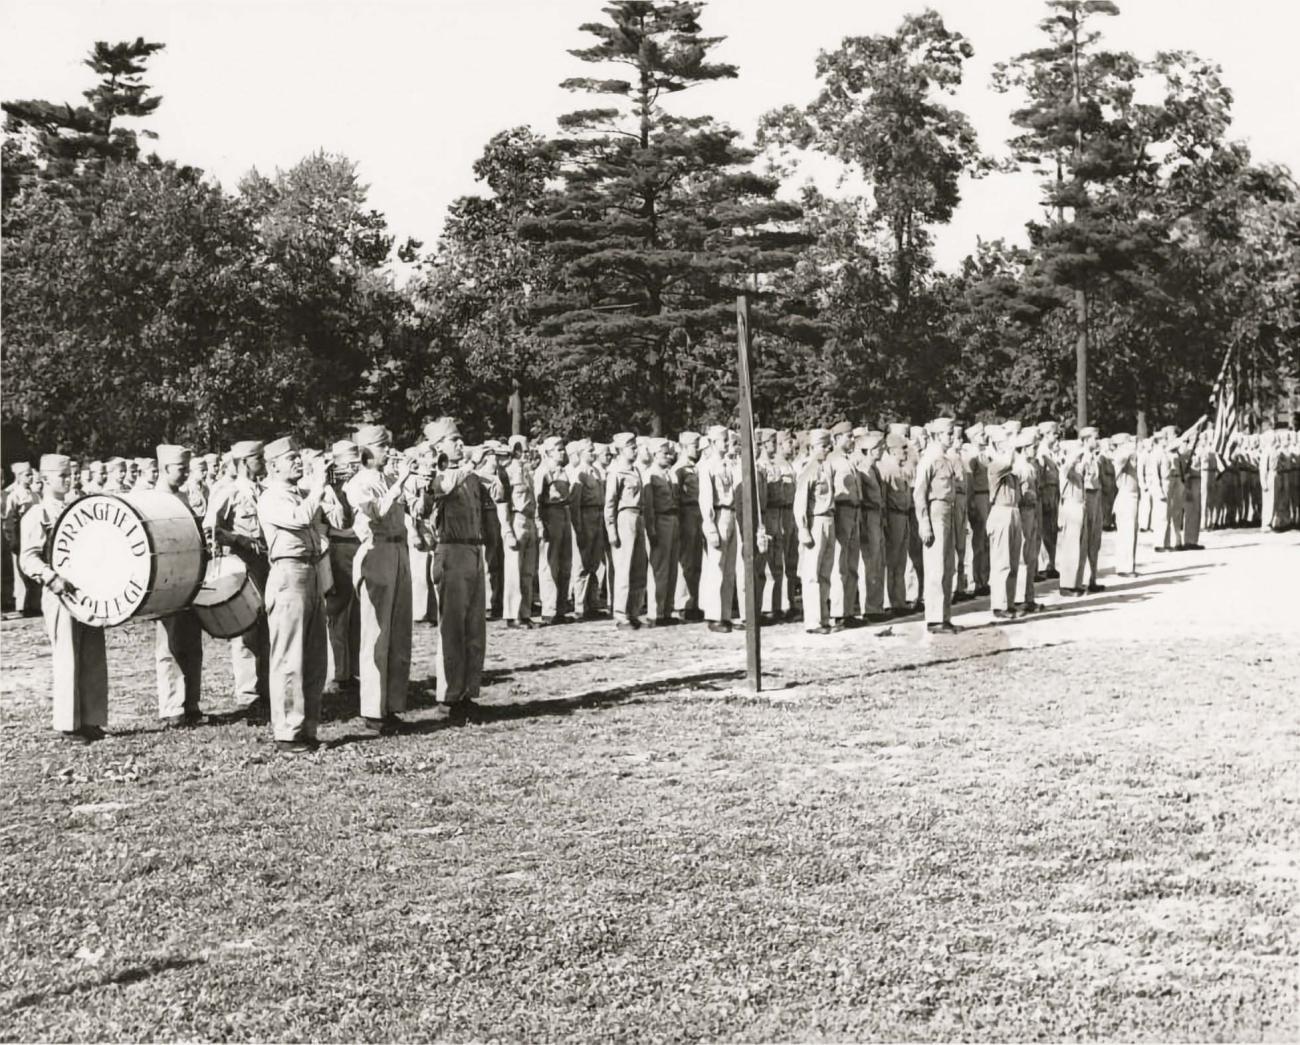 Marching Men in 1943, Springfield College